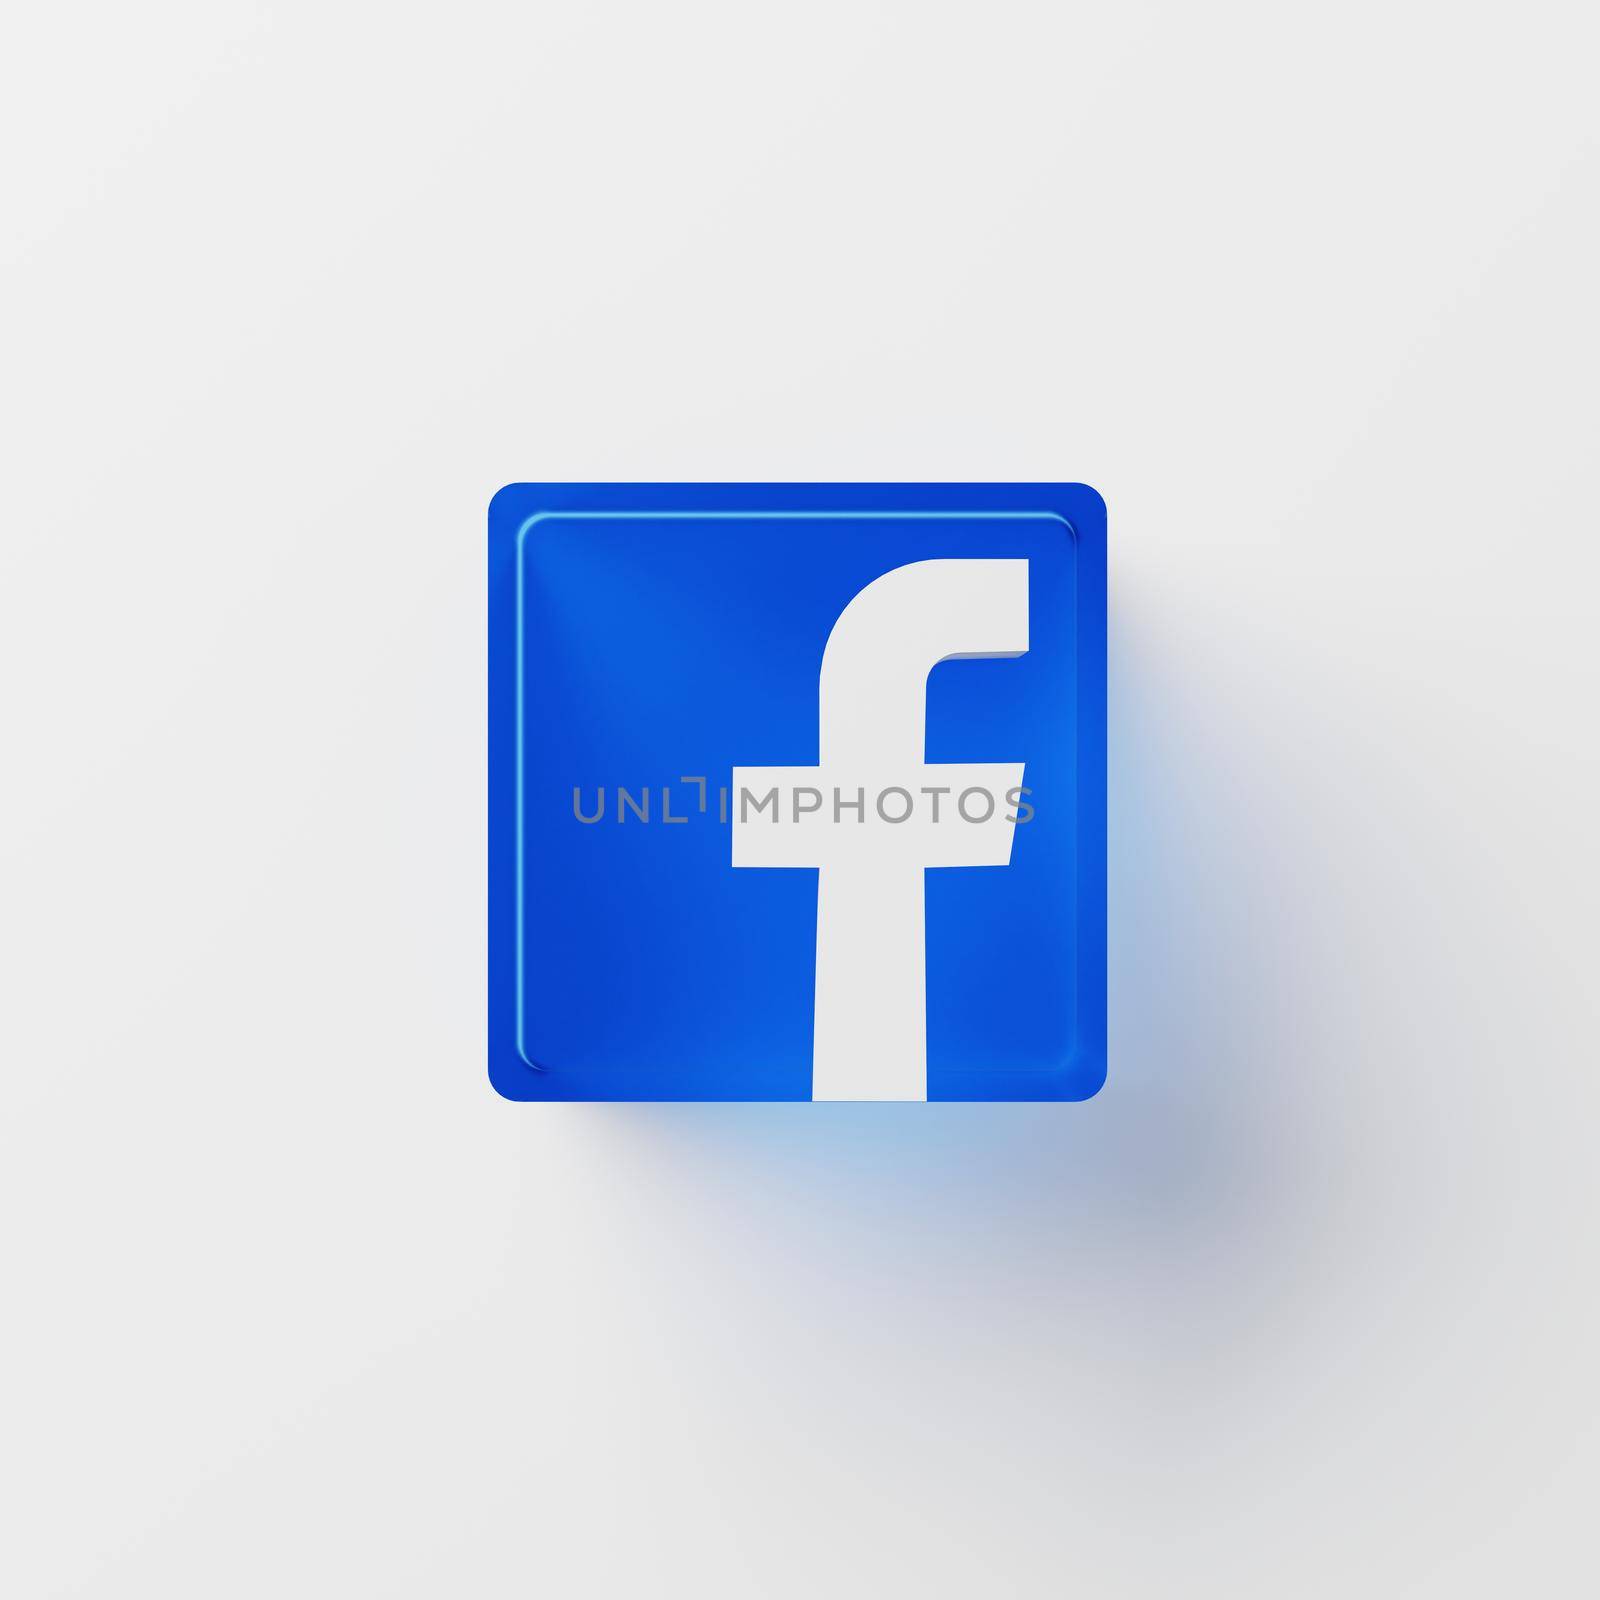 Chonburi, Thailand - Apr 15, 2021: A close up Facebook logo icon on isolated white background. Facebook is largest social media website in the world, shallow depth of field. 3D illustration rendering by MiniStocker